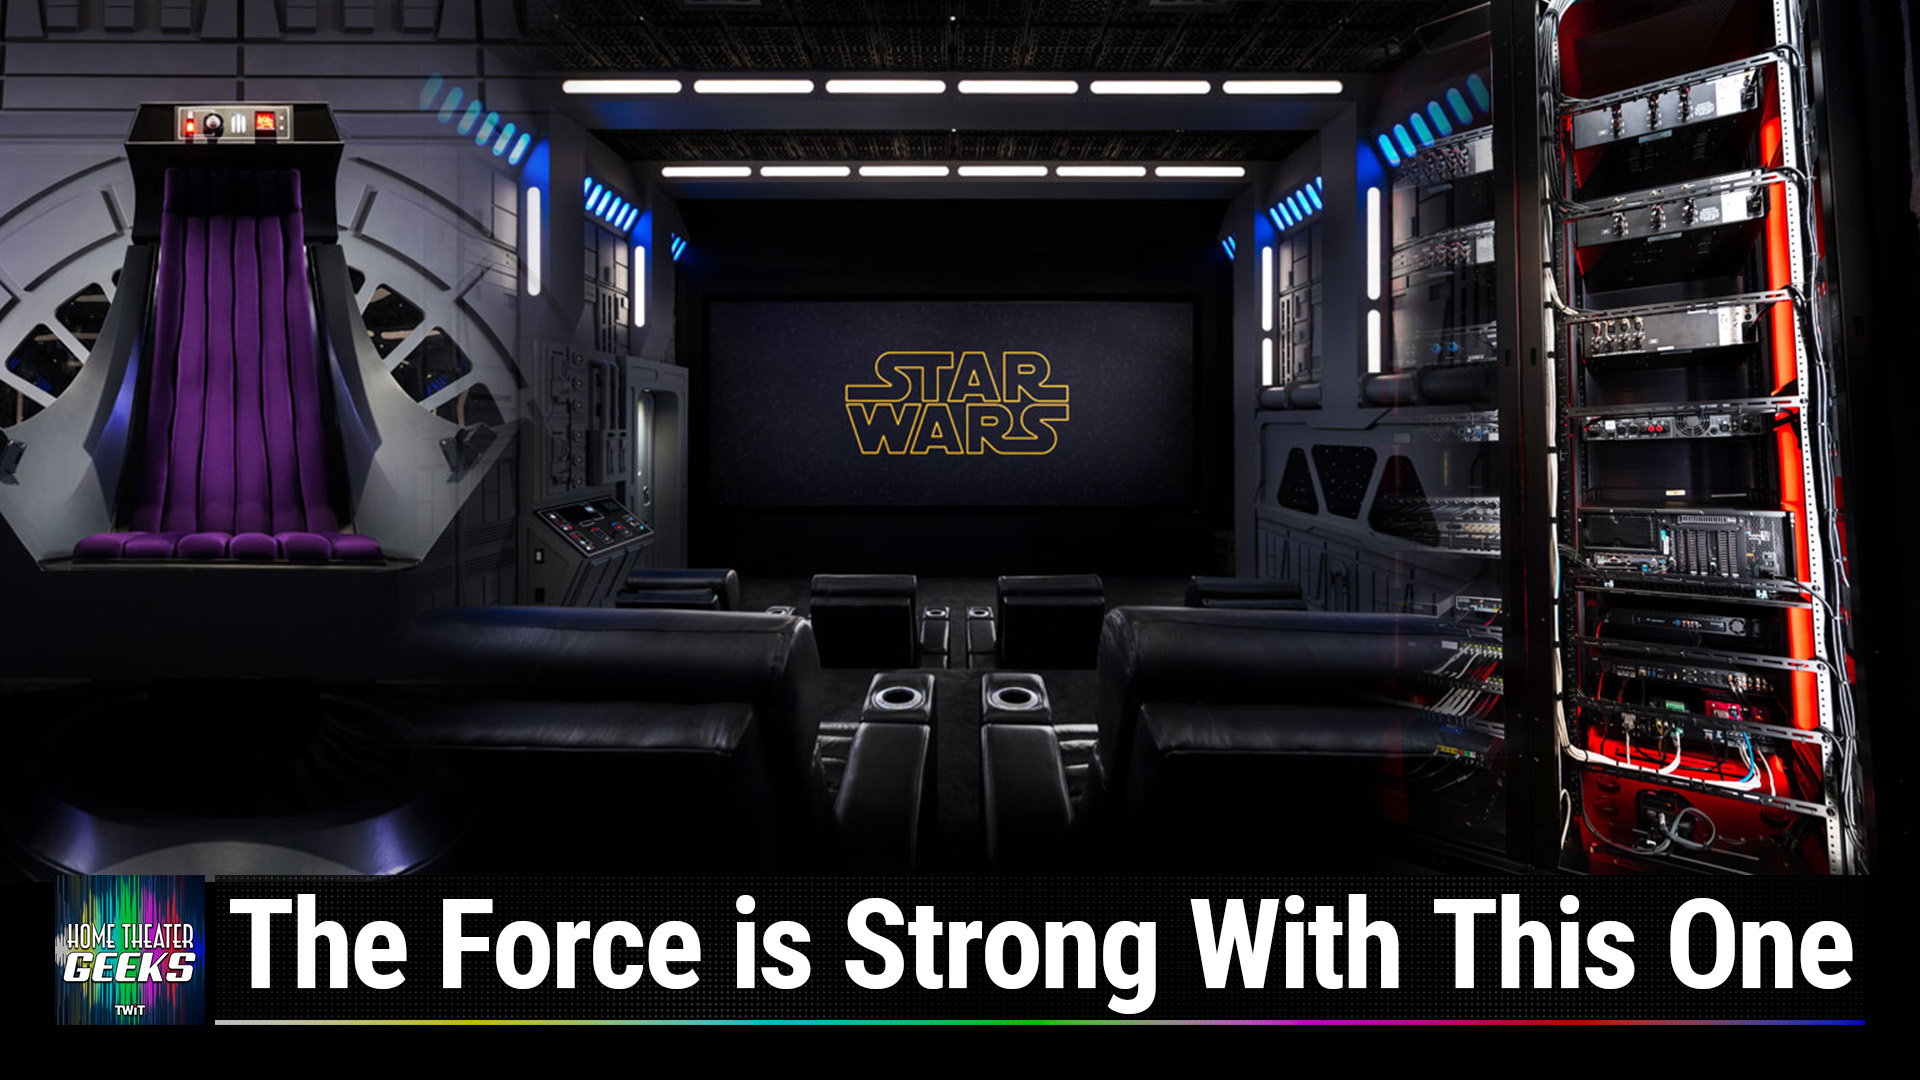 Star Wars Home Theater! (Home Theater Geeks #427)